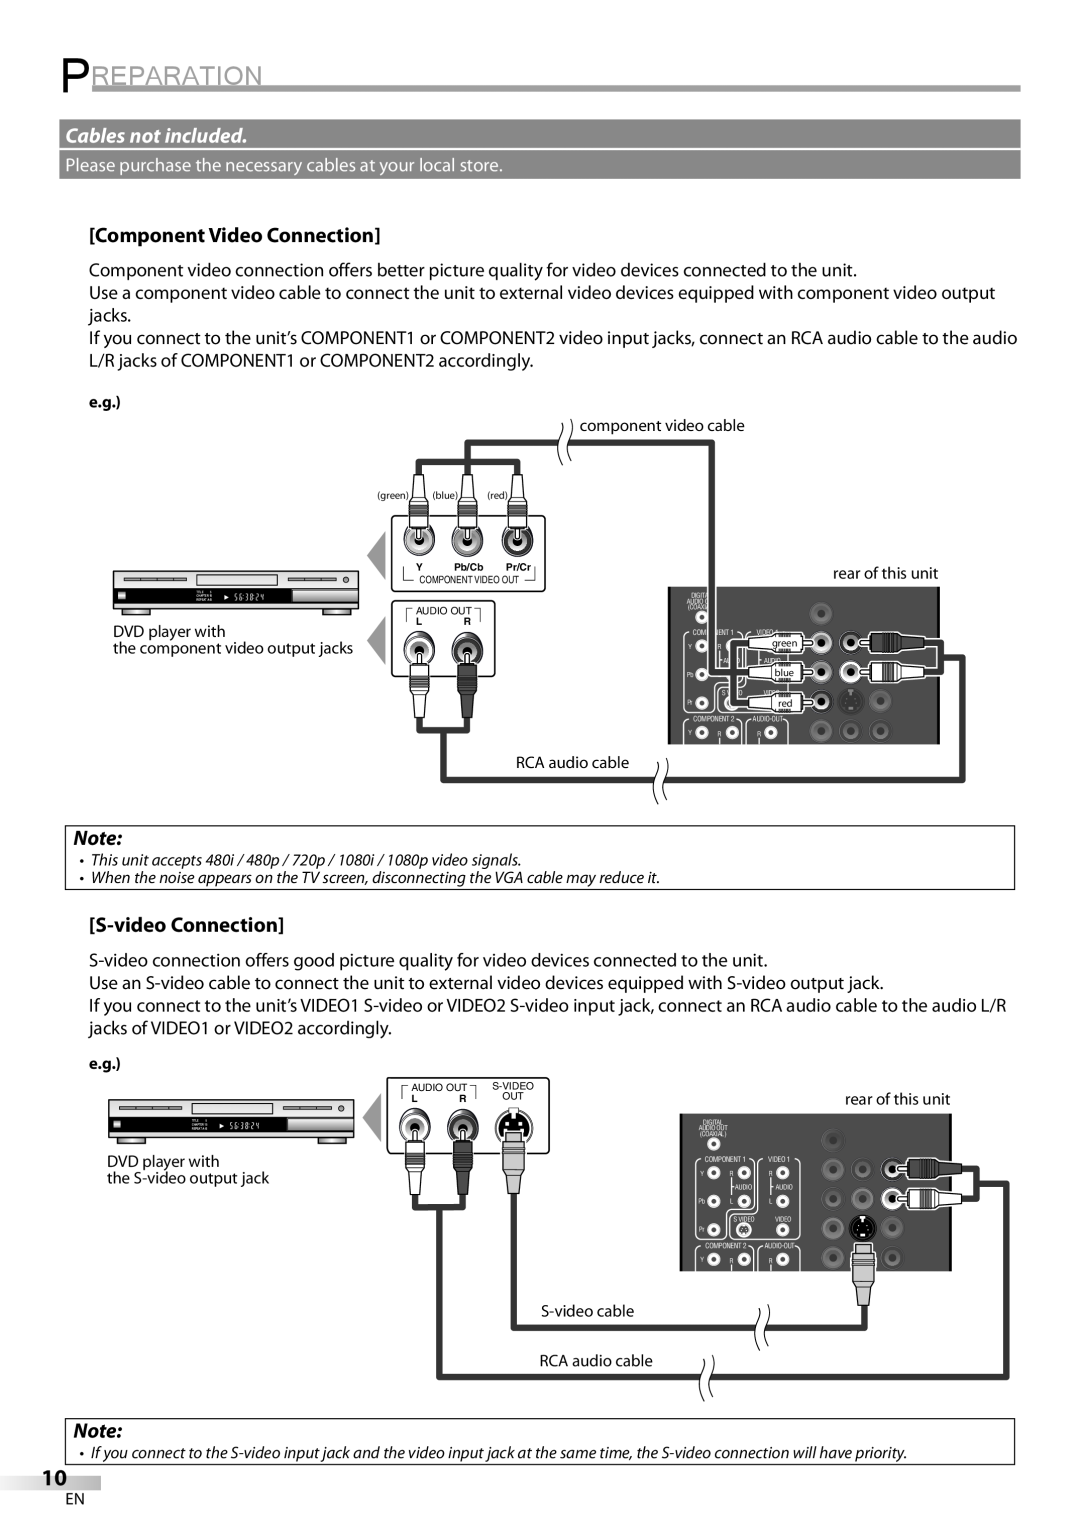 Emerson LC420EM8 owner manual Preparation, Cables not included, Component Video Connection, S-video Connection 